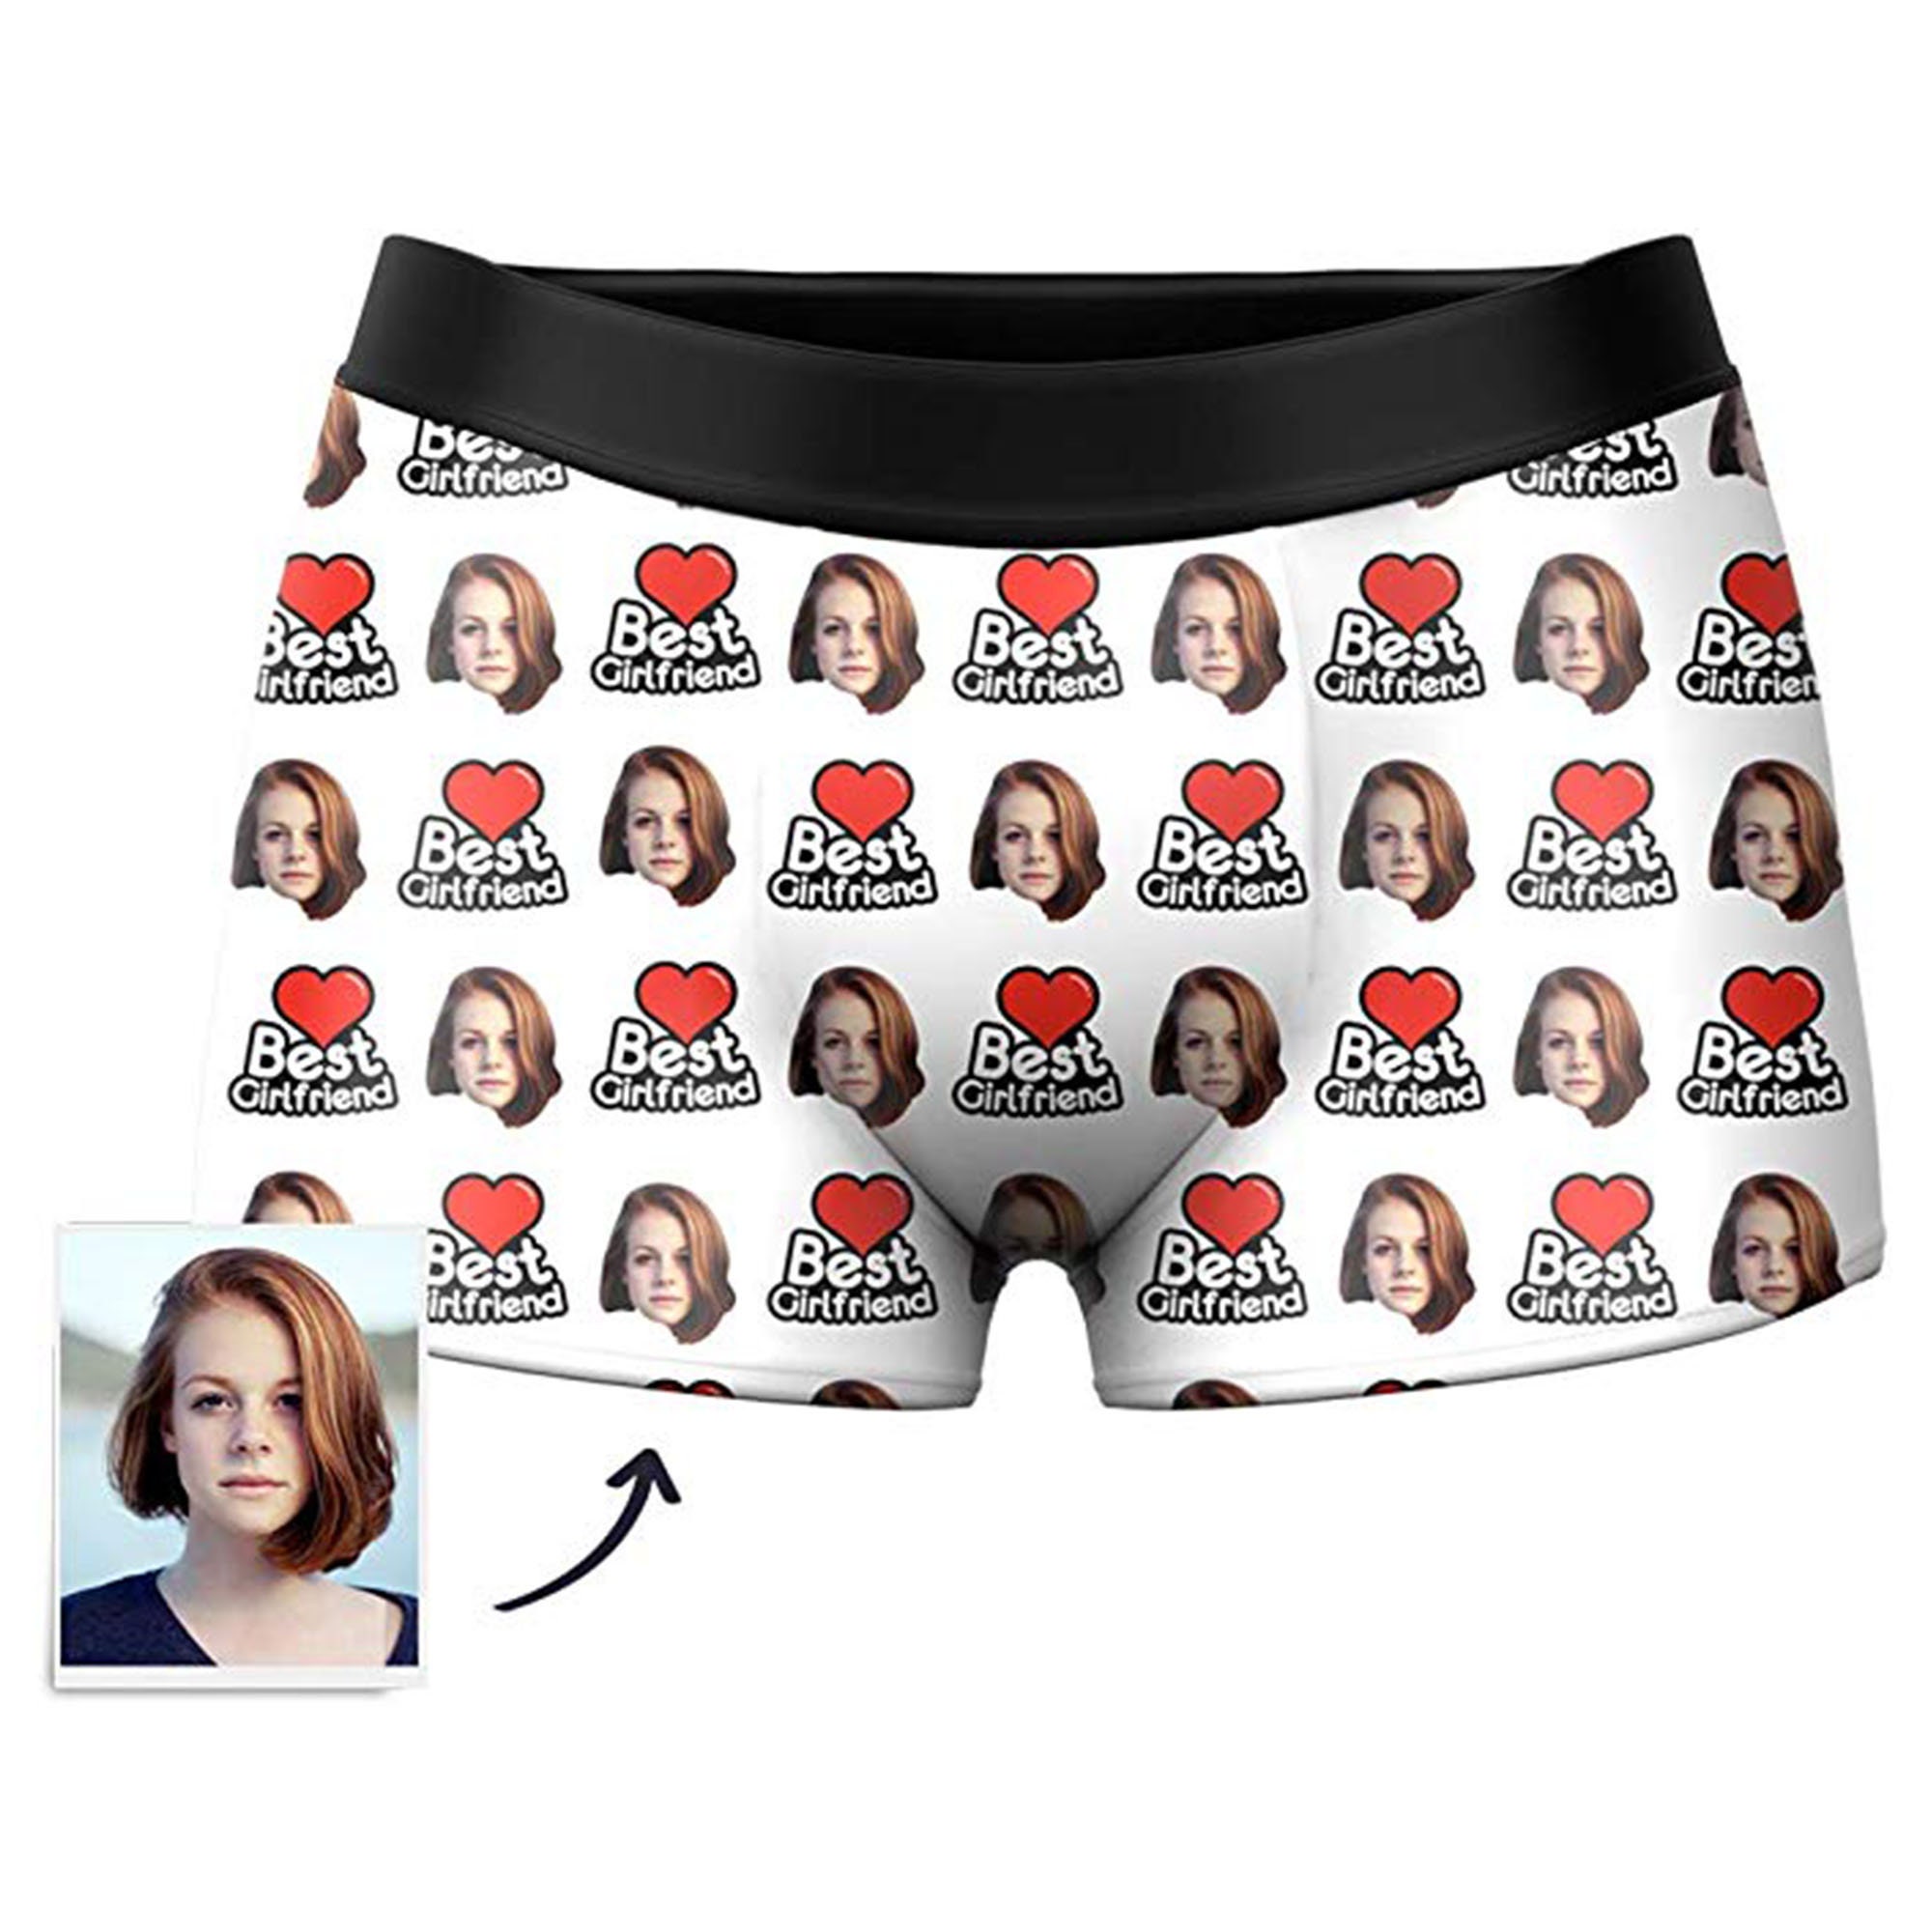 Custom 3D Printed Boxer Personalized Underwear For Him For Men Funny Face  Novelty Shorts Briefs By Po Boxers From Lonandon, $16.5